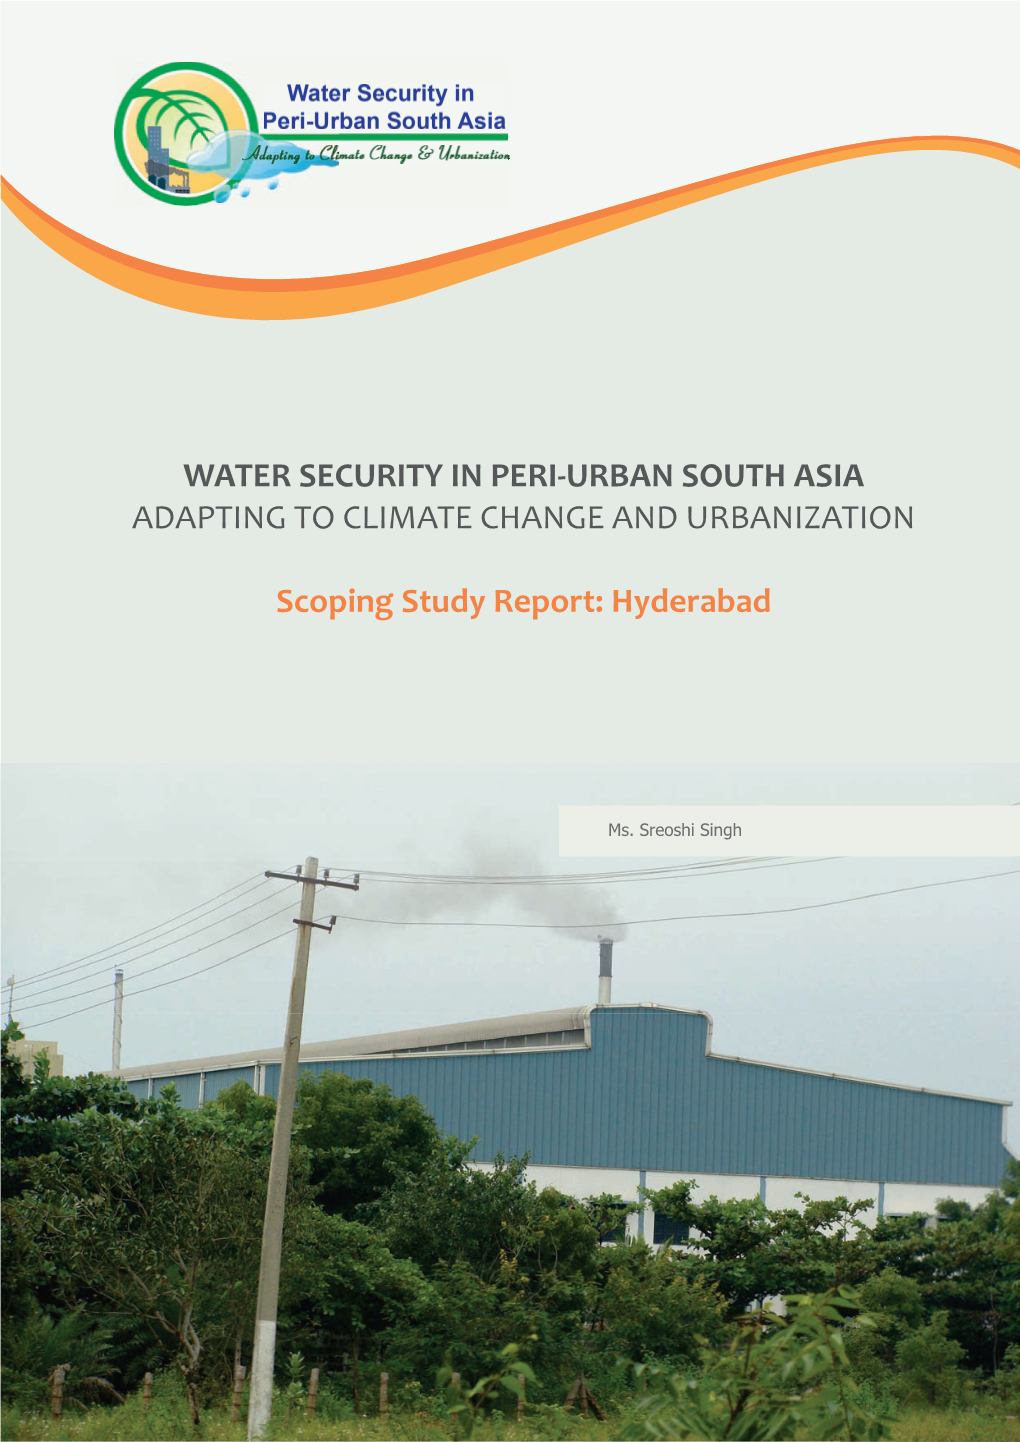 Water Security in Peri-Urban South Asia: Adapting to Climate